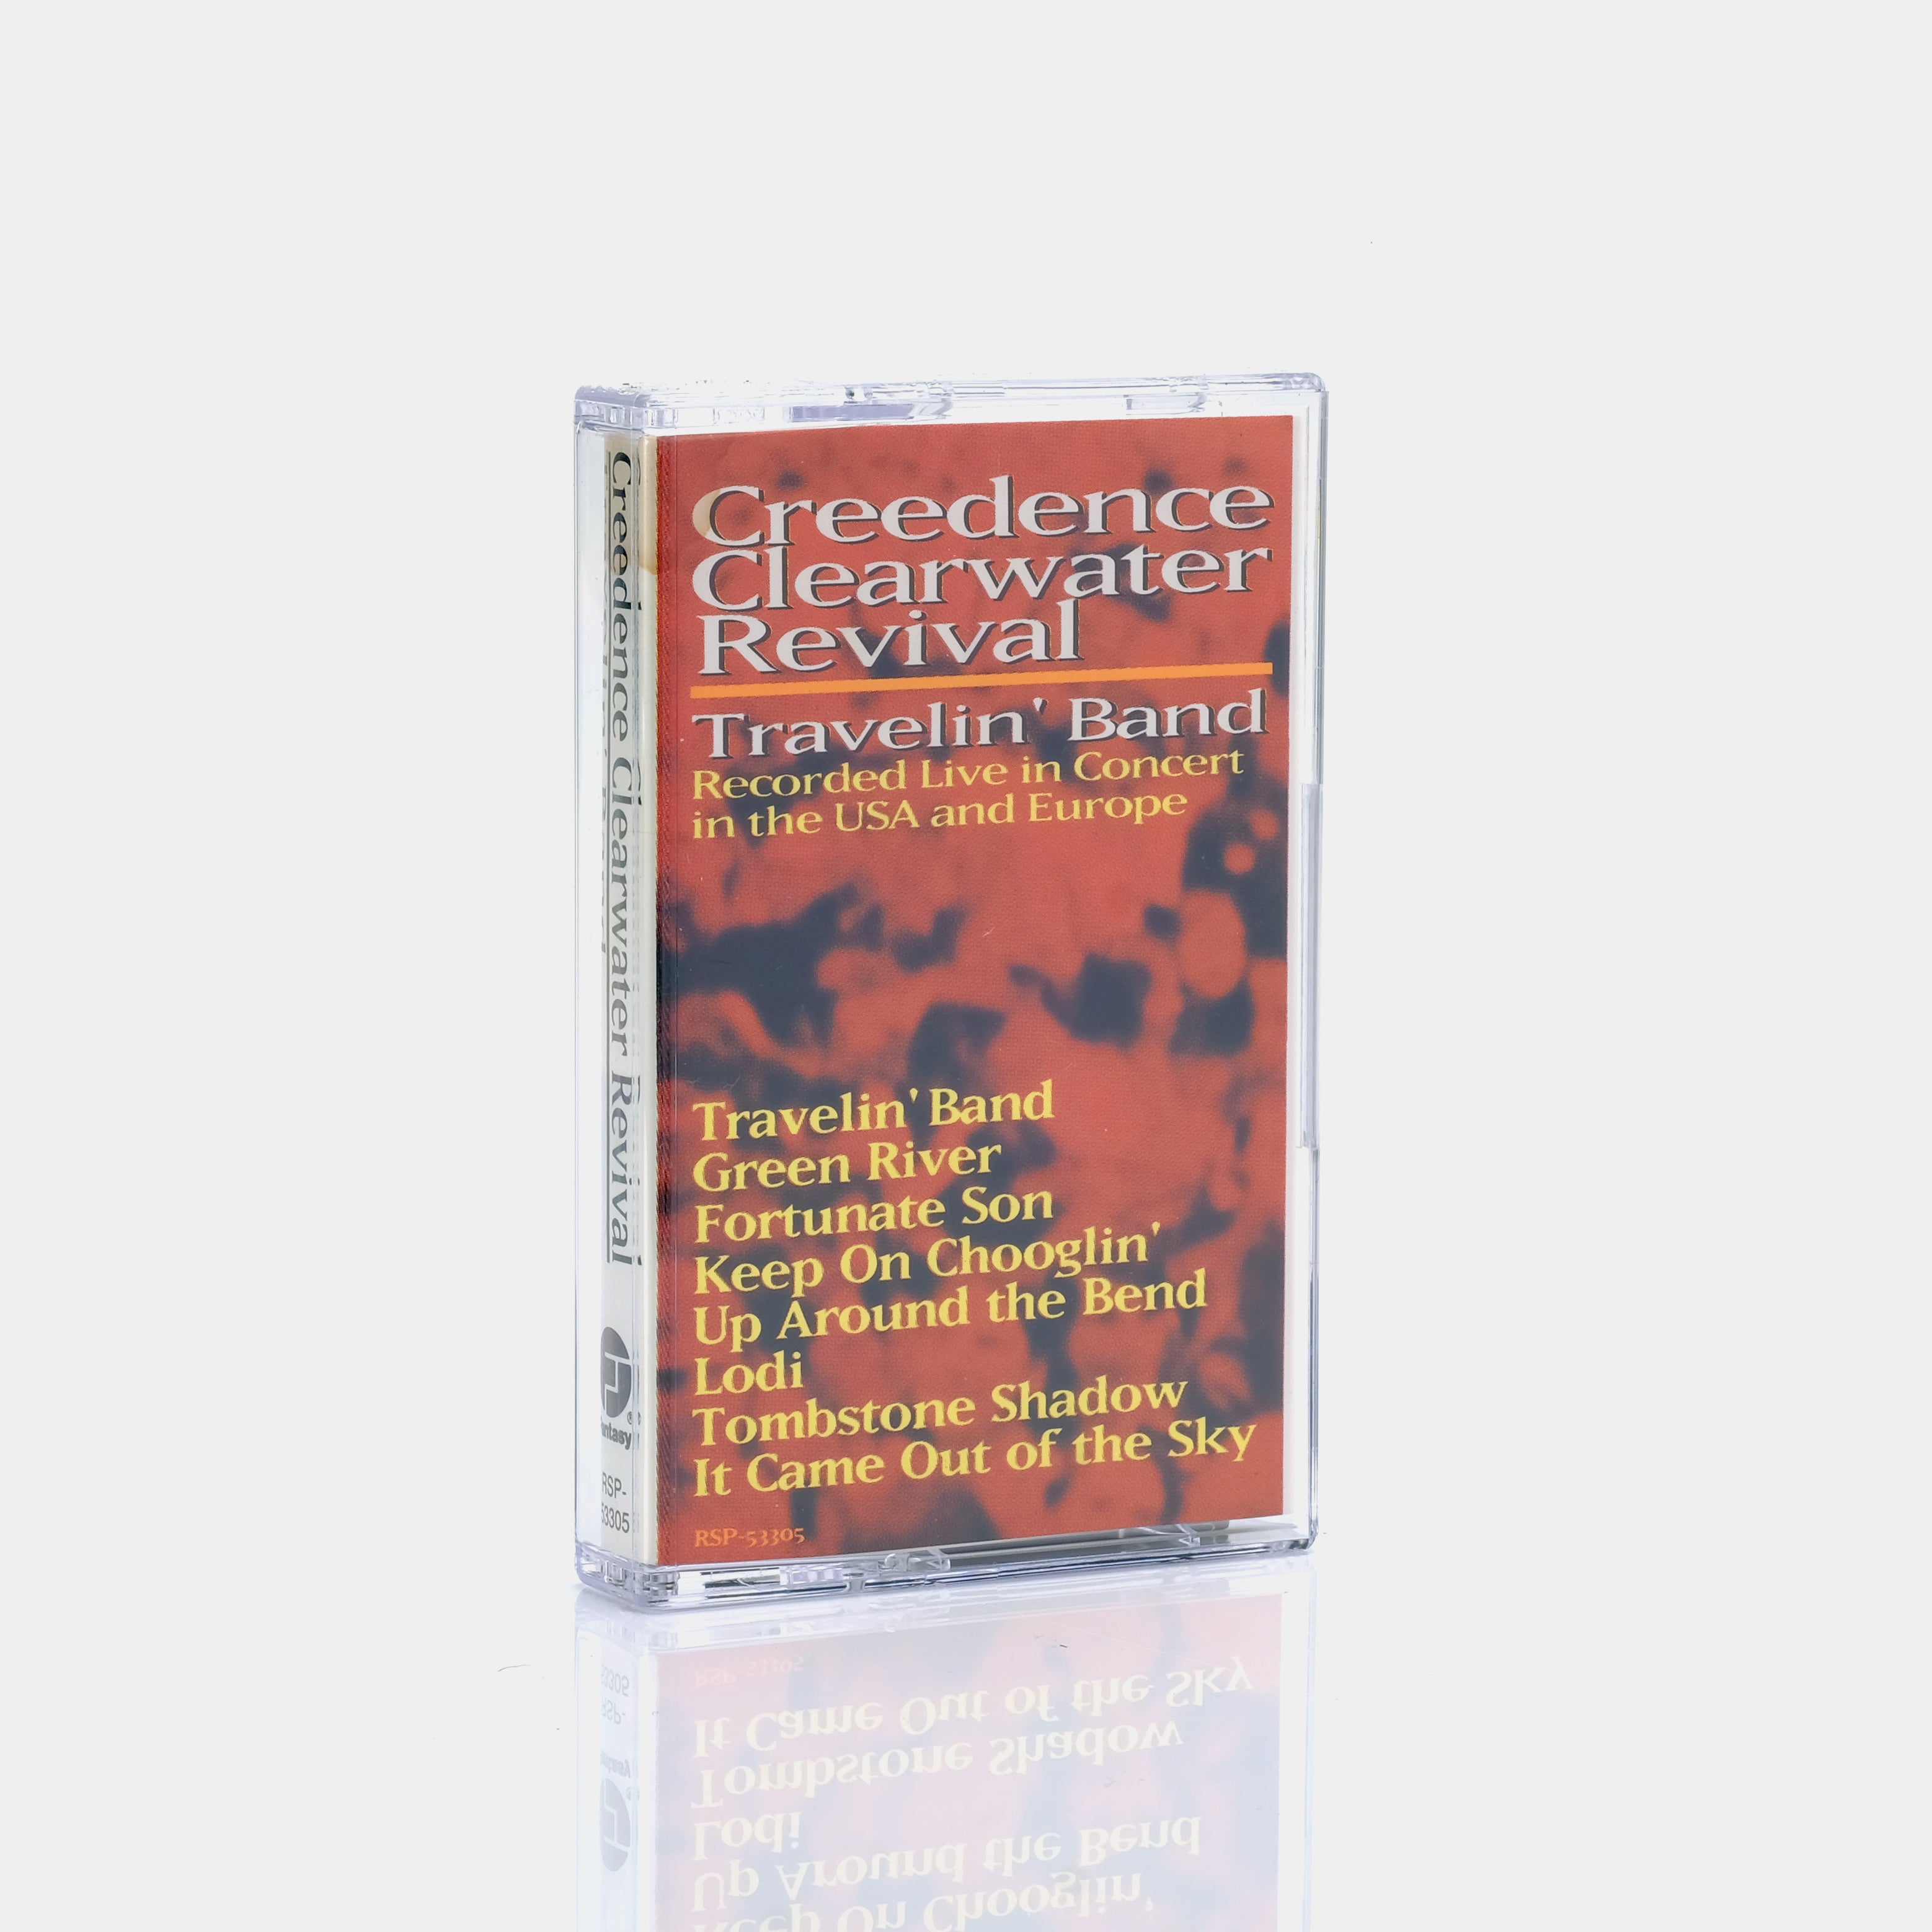 Creedence Clearwater Revival - Travelin' Band Cassette Tape